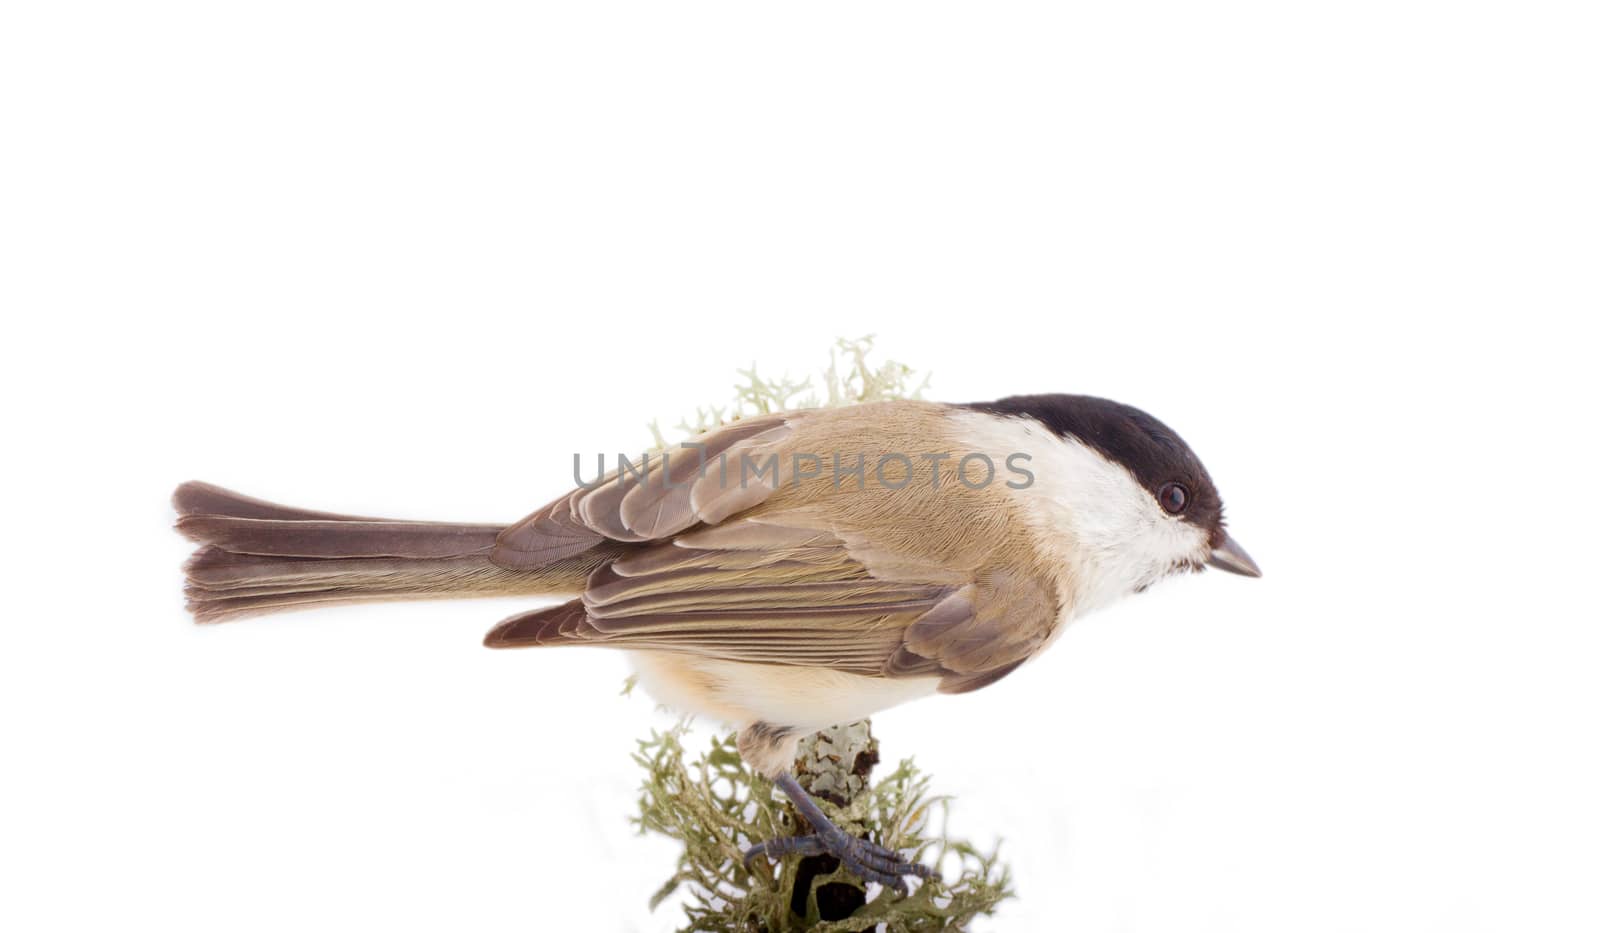 all known bird on branch isolated on white